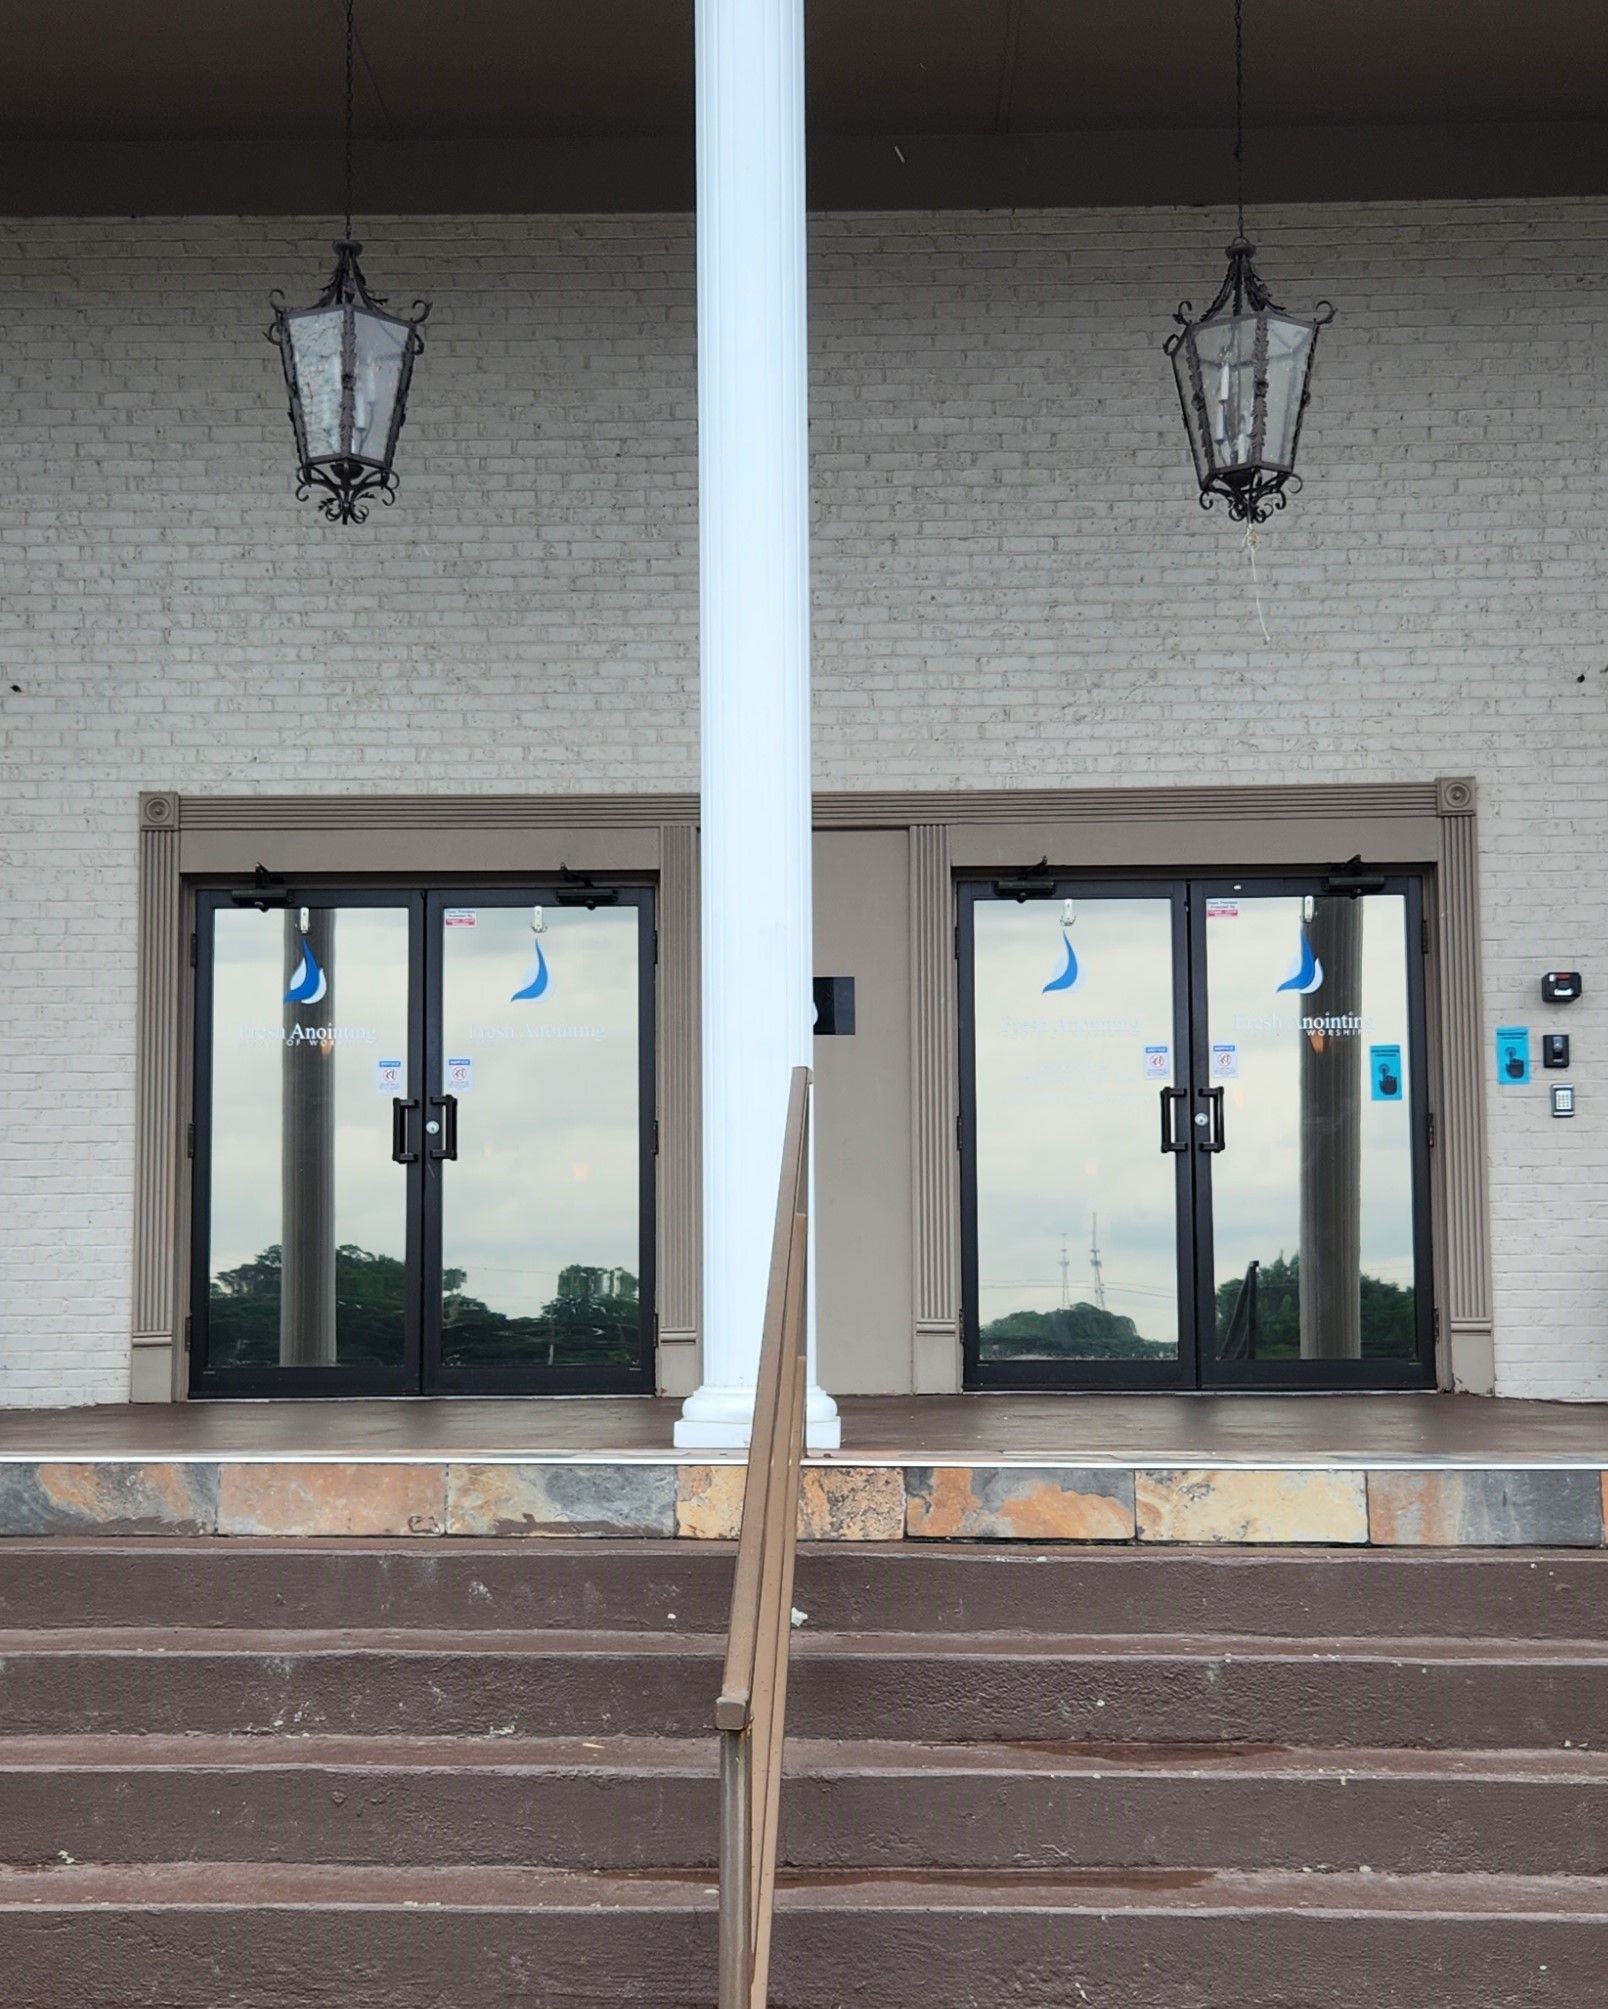 efficient window tint - Over 91% Bright Glare has been cut along with heat allowing the perfect church space. Montgomery AL